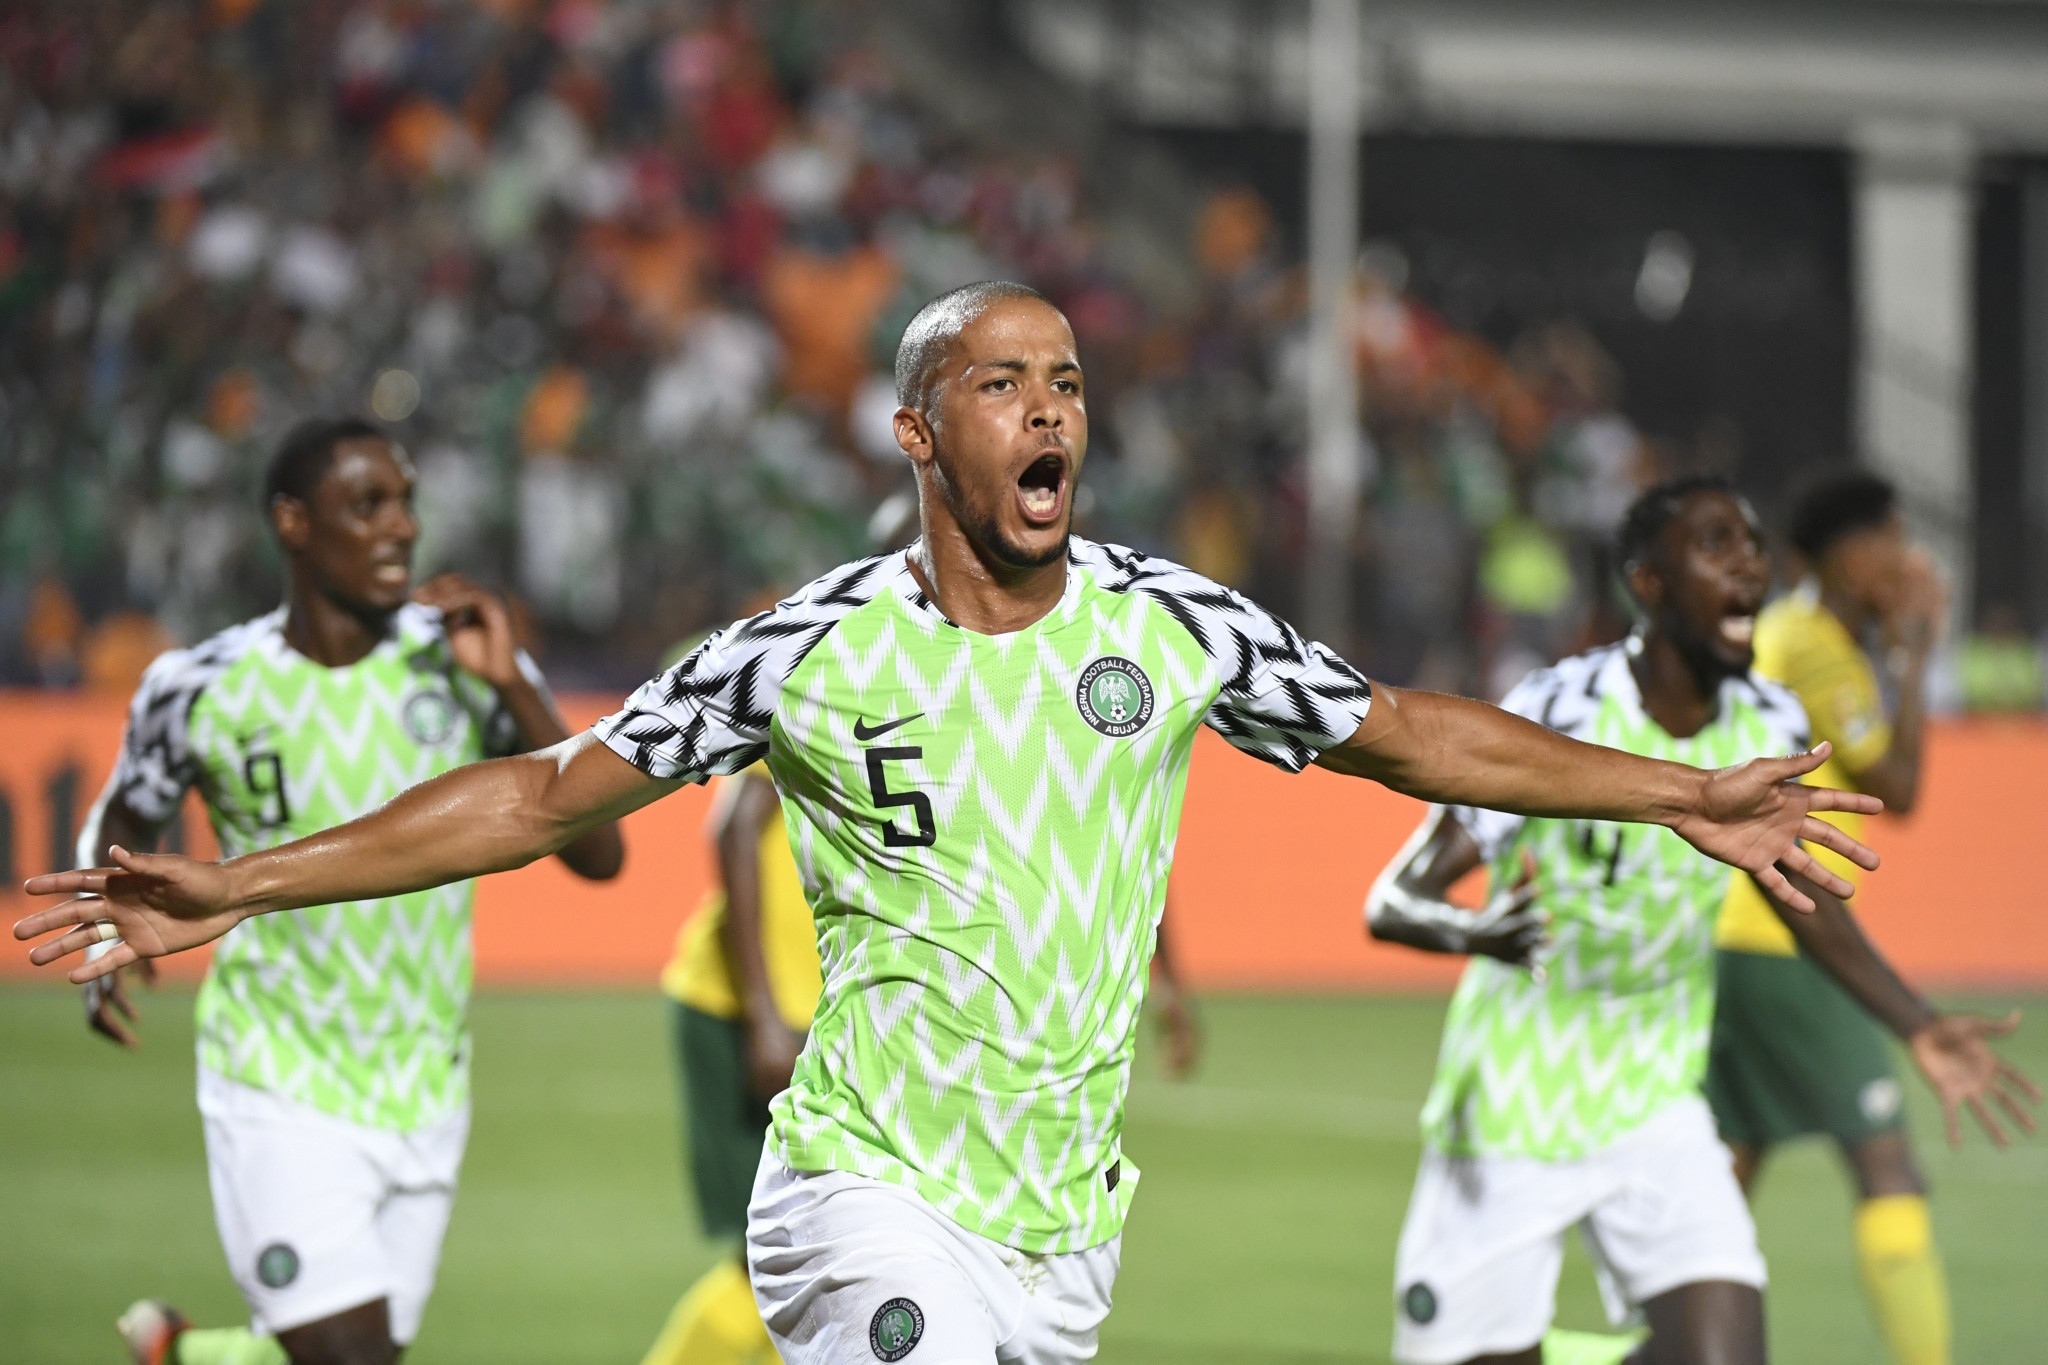 Senegal and Nigeria scrape through to reach semi-finals of African Cup of Nations 